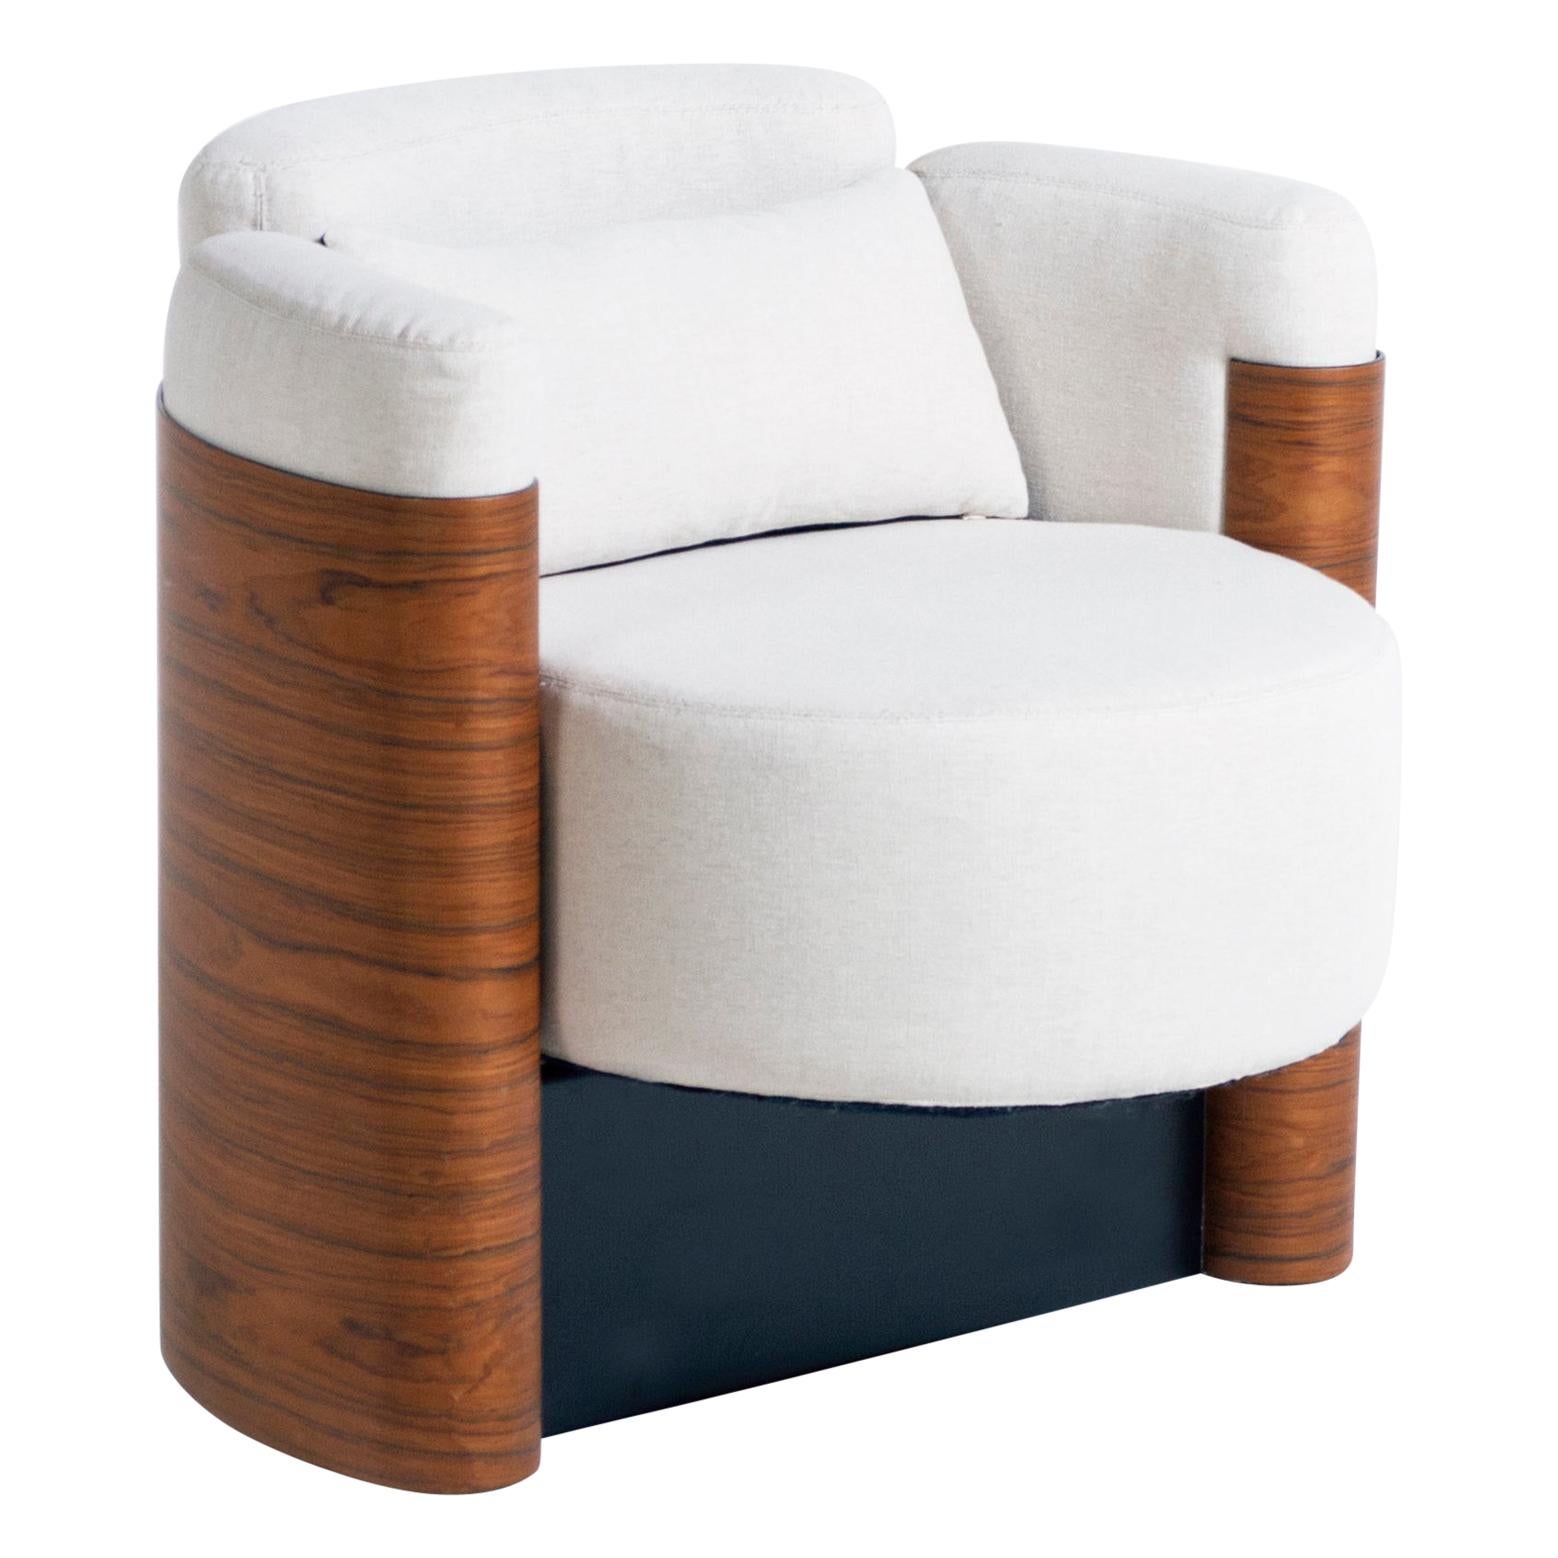 Armchair in Steel, Wood and Upholstery, Brazilian Contemporary Design For Sale